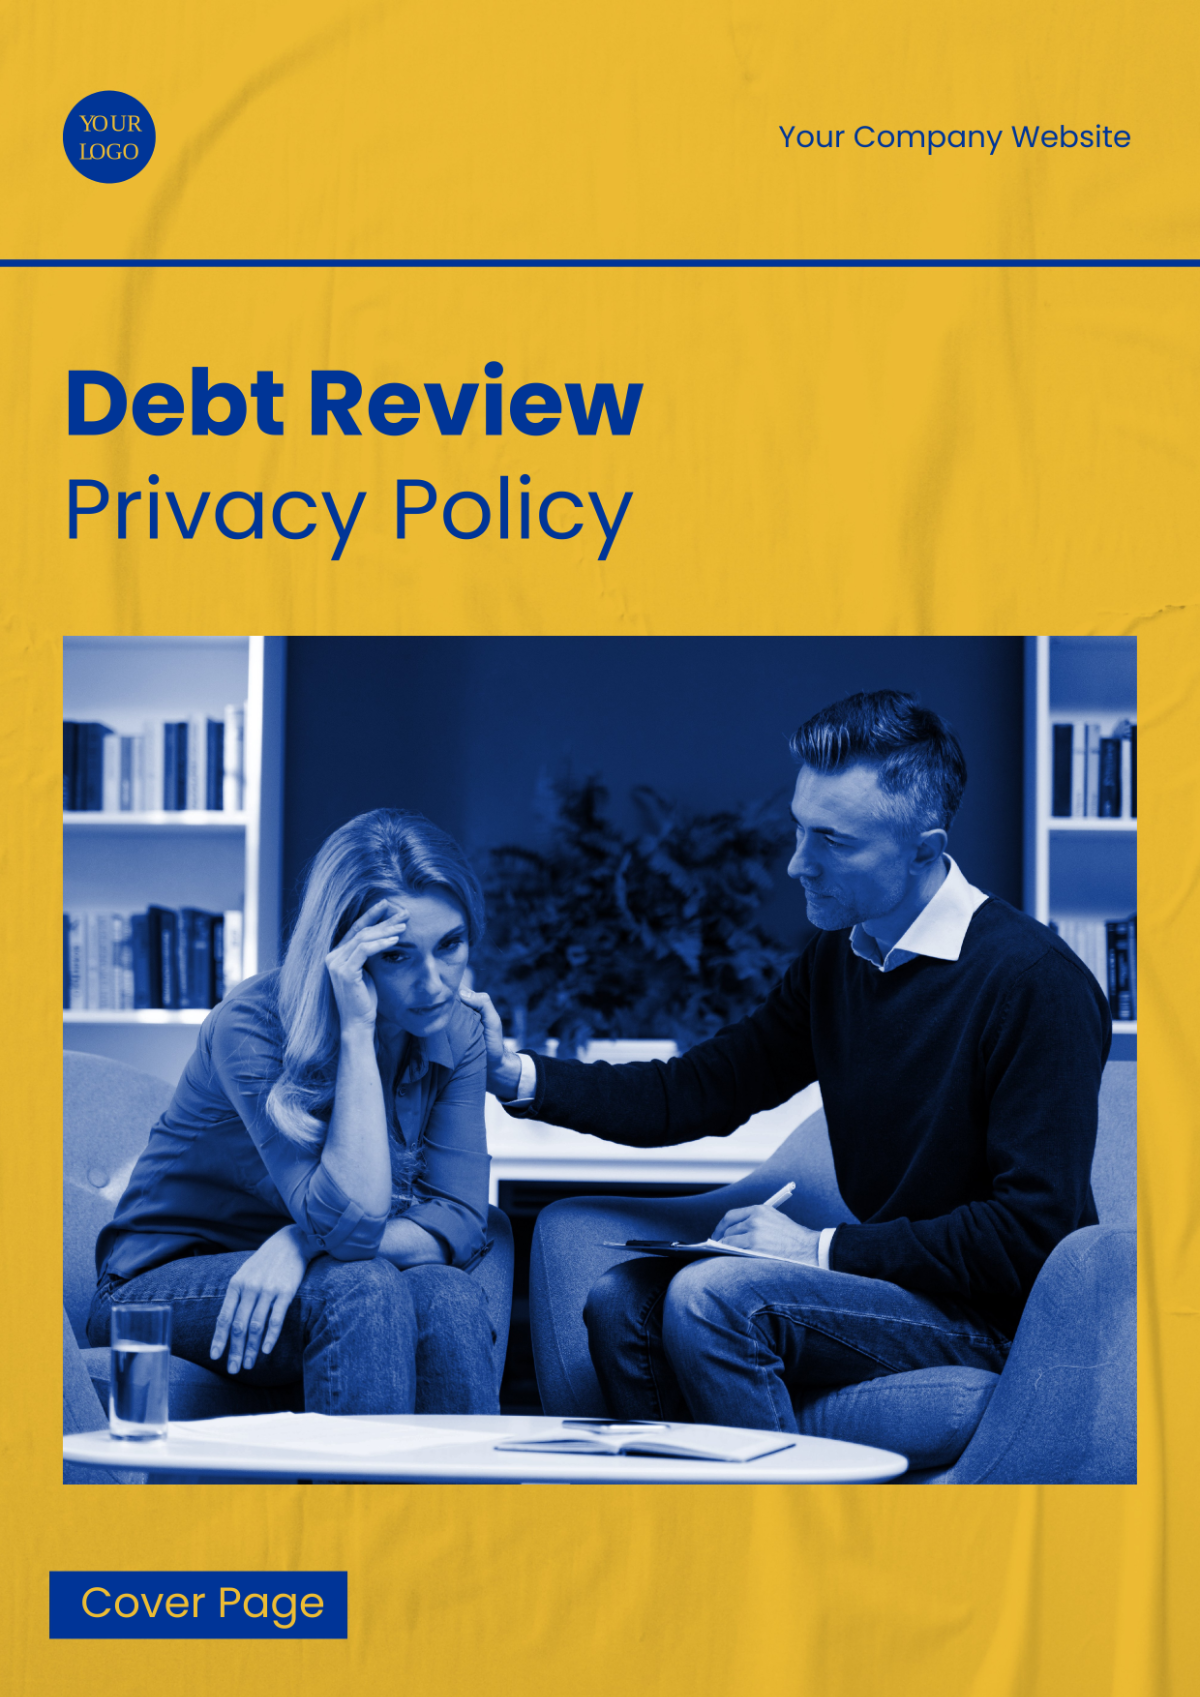 Debt Review Privacy Policy Cover Page